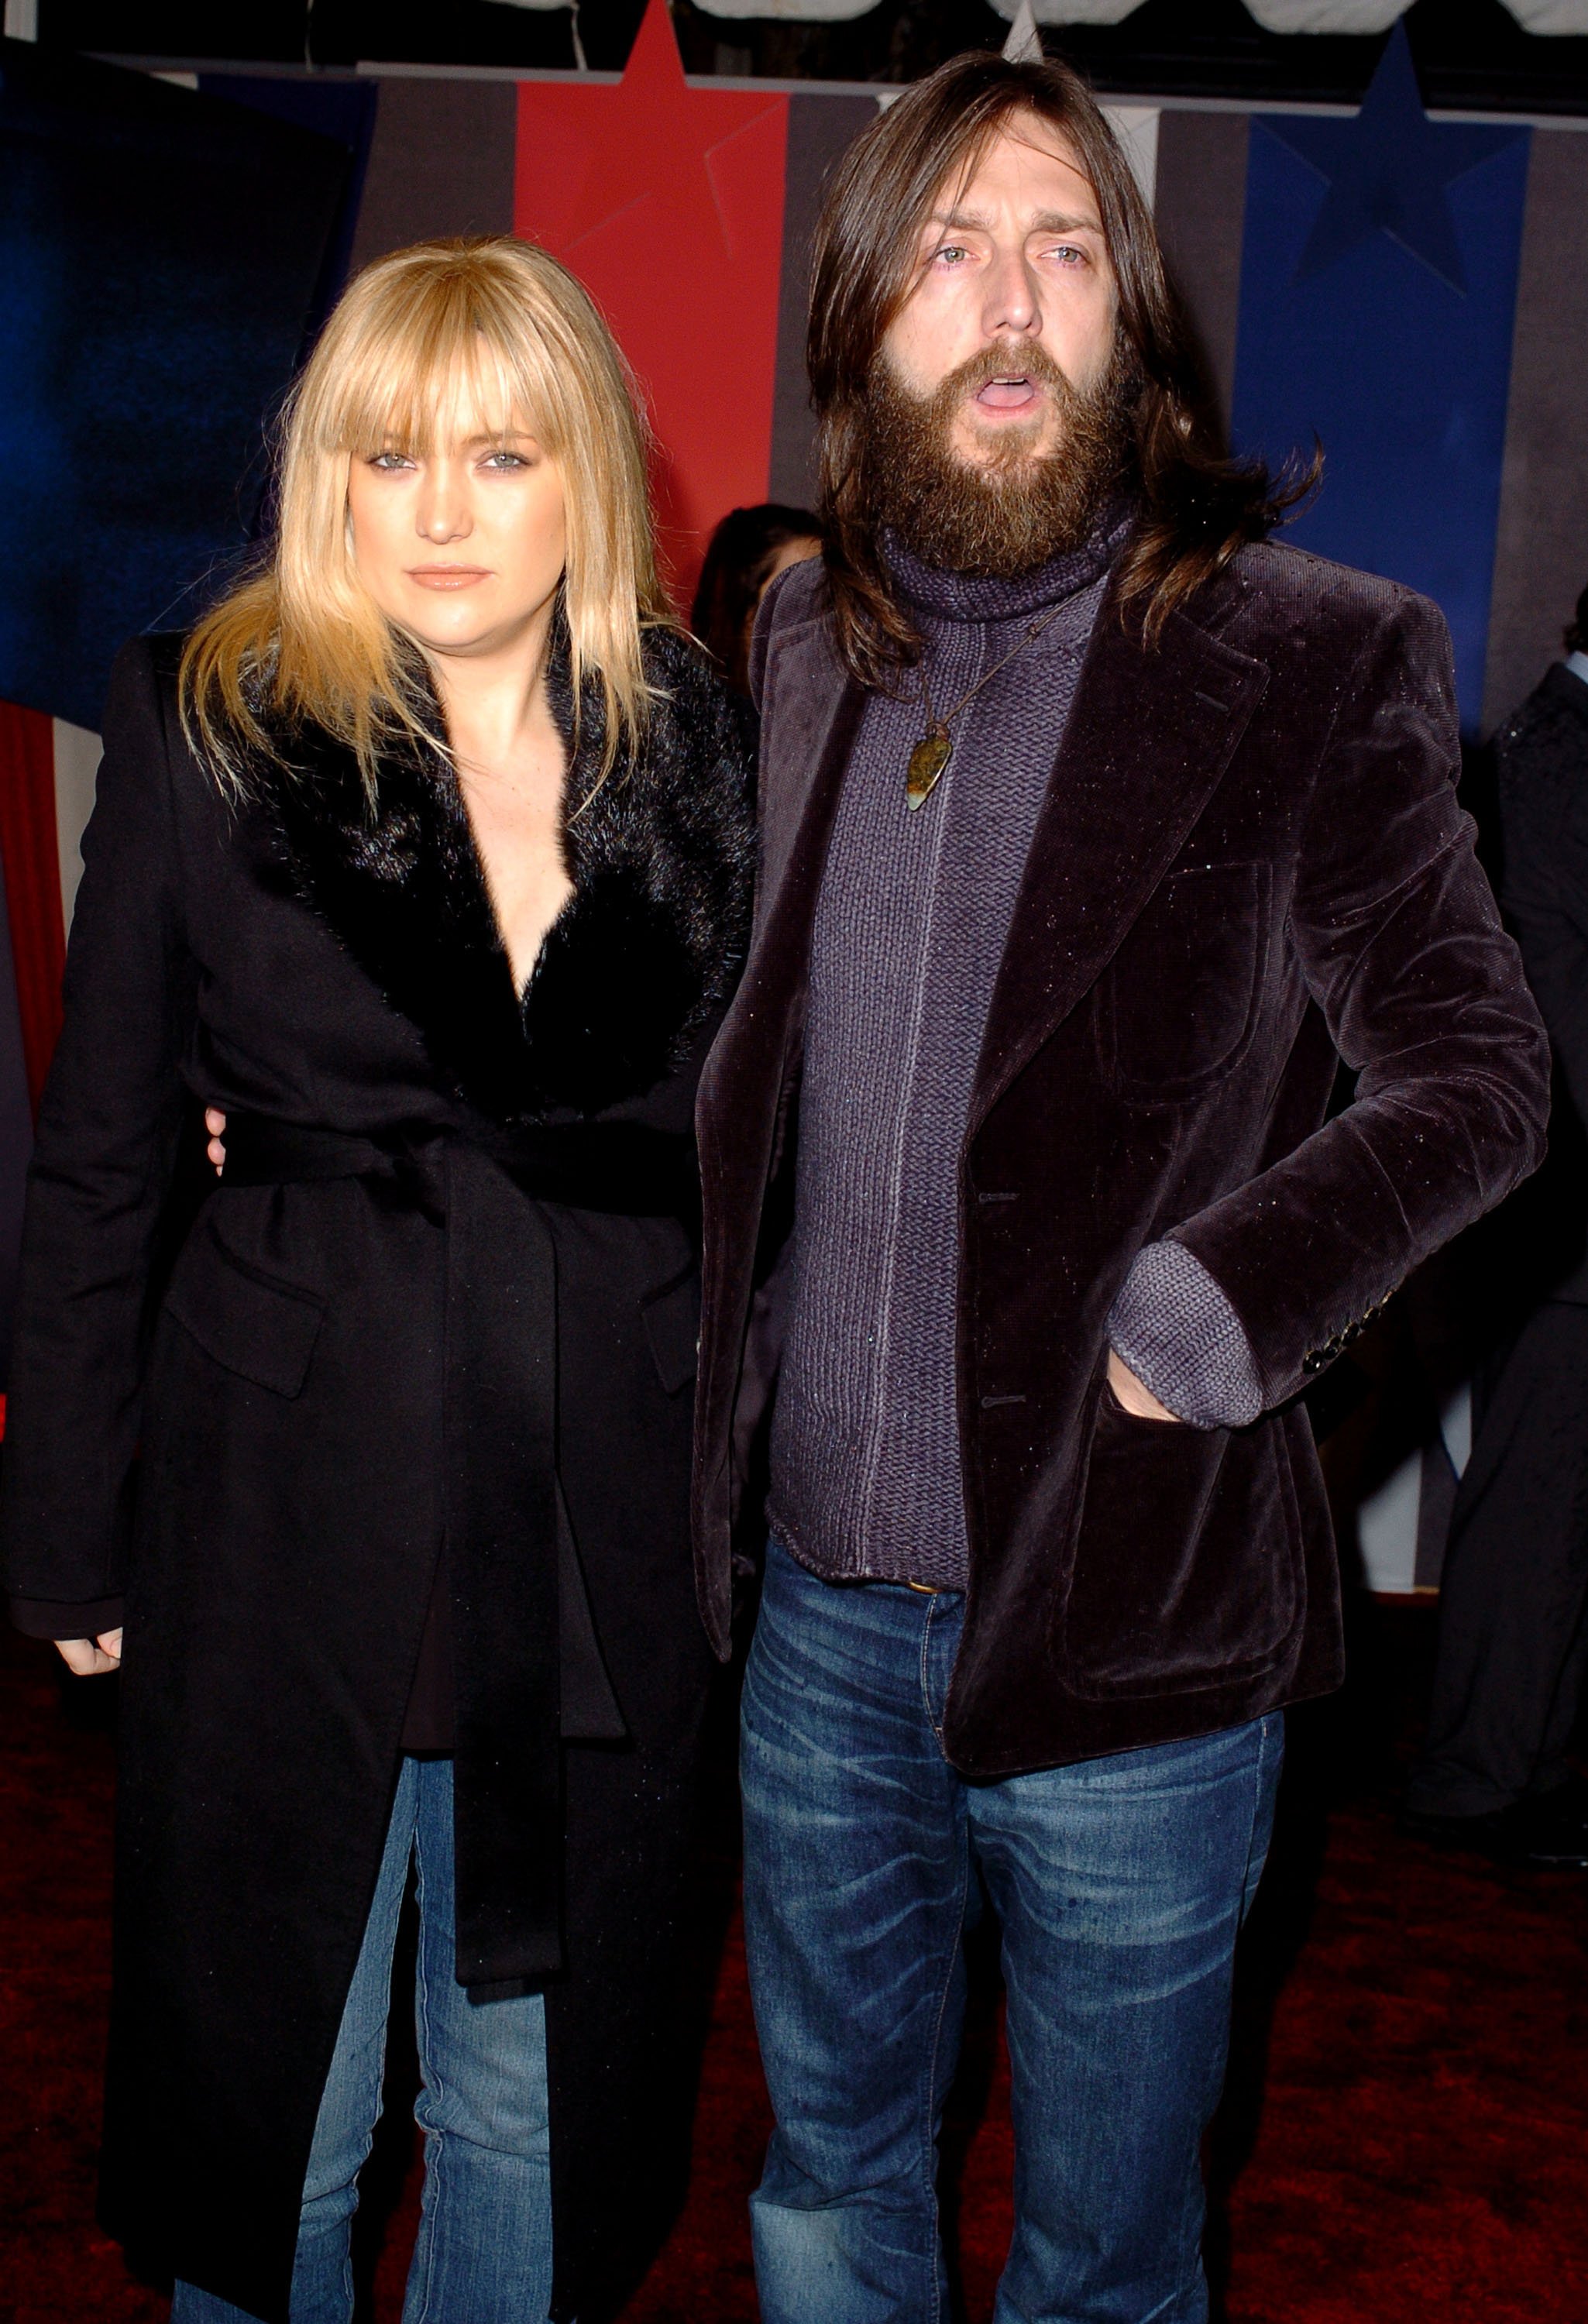 Kate Hudson and Chris Robinson during "Miracle" premiere at the El Capitan Theater in Hollywood, CA.  / Source: Getty Images